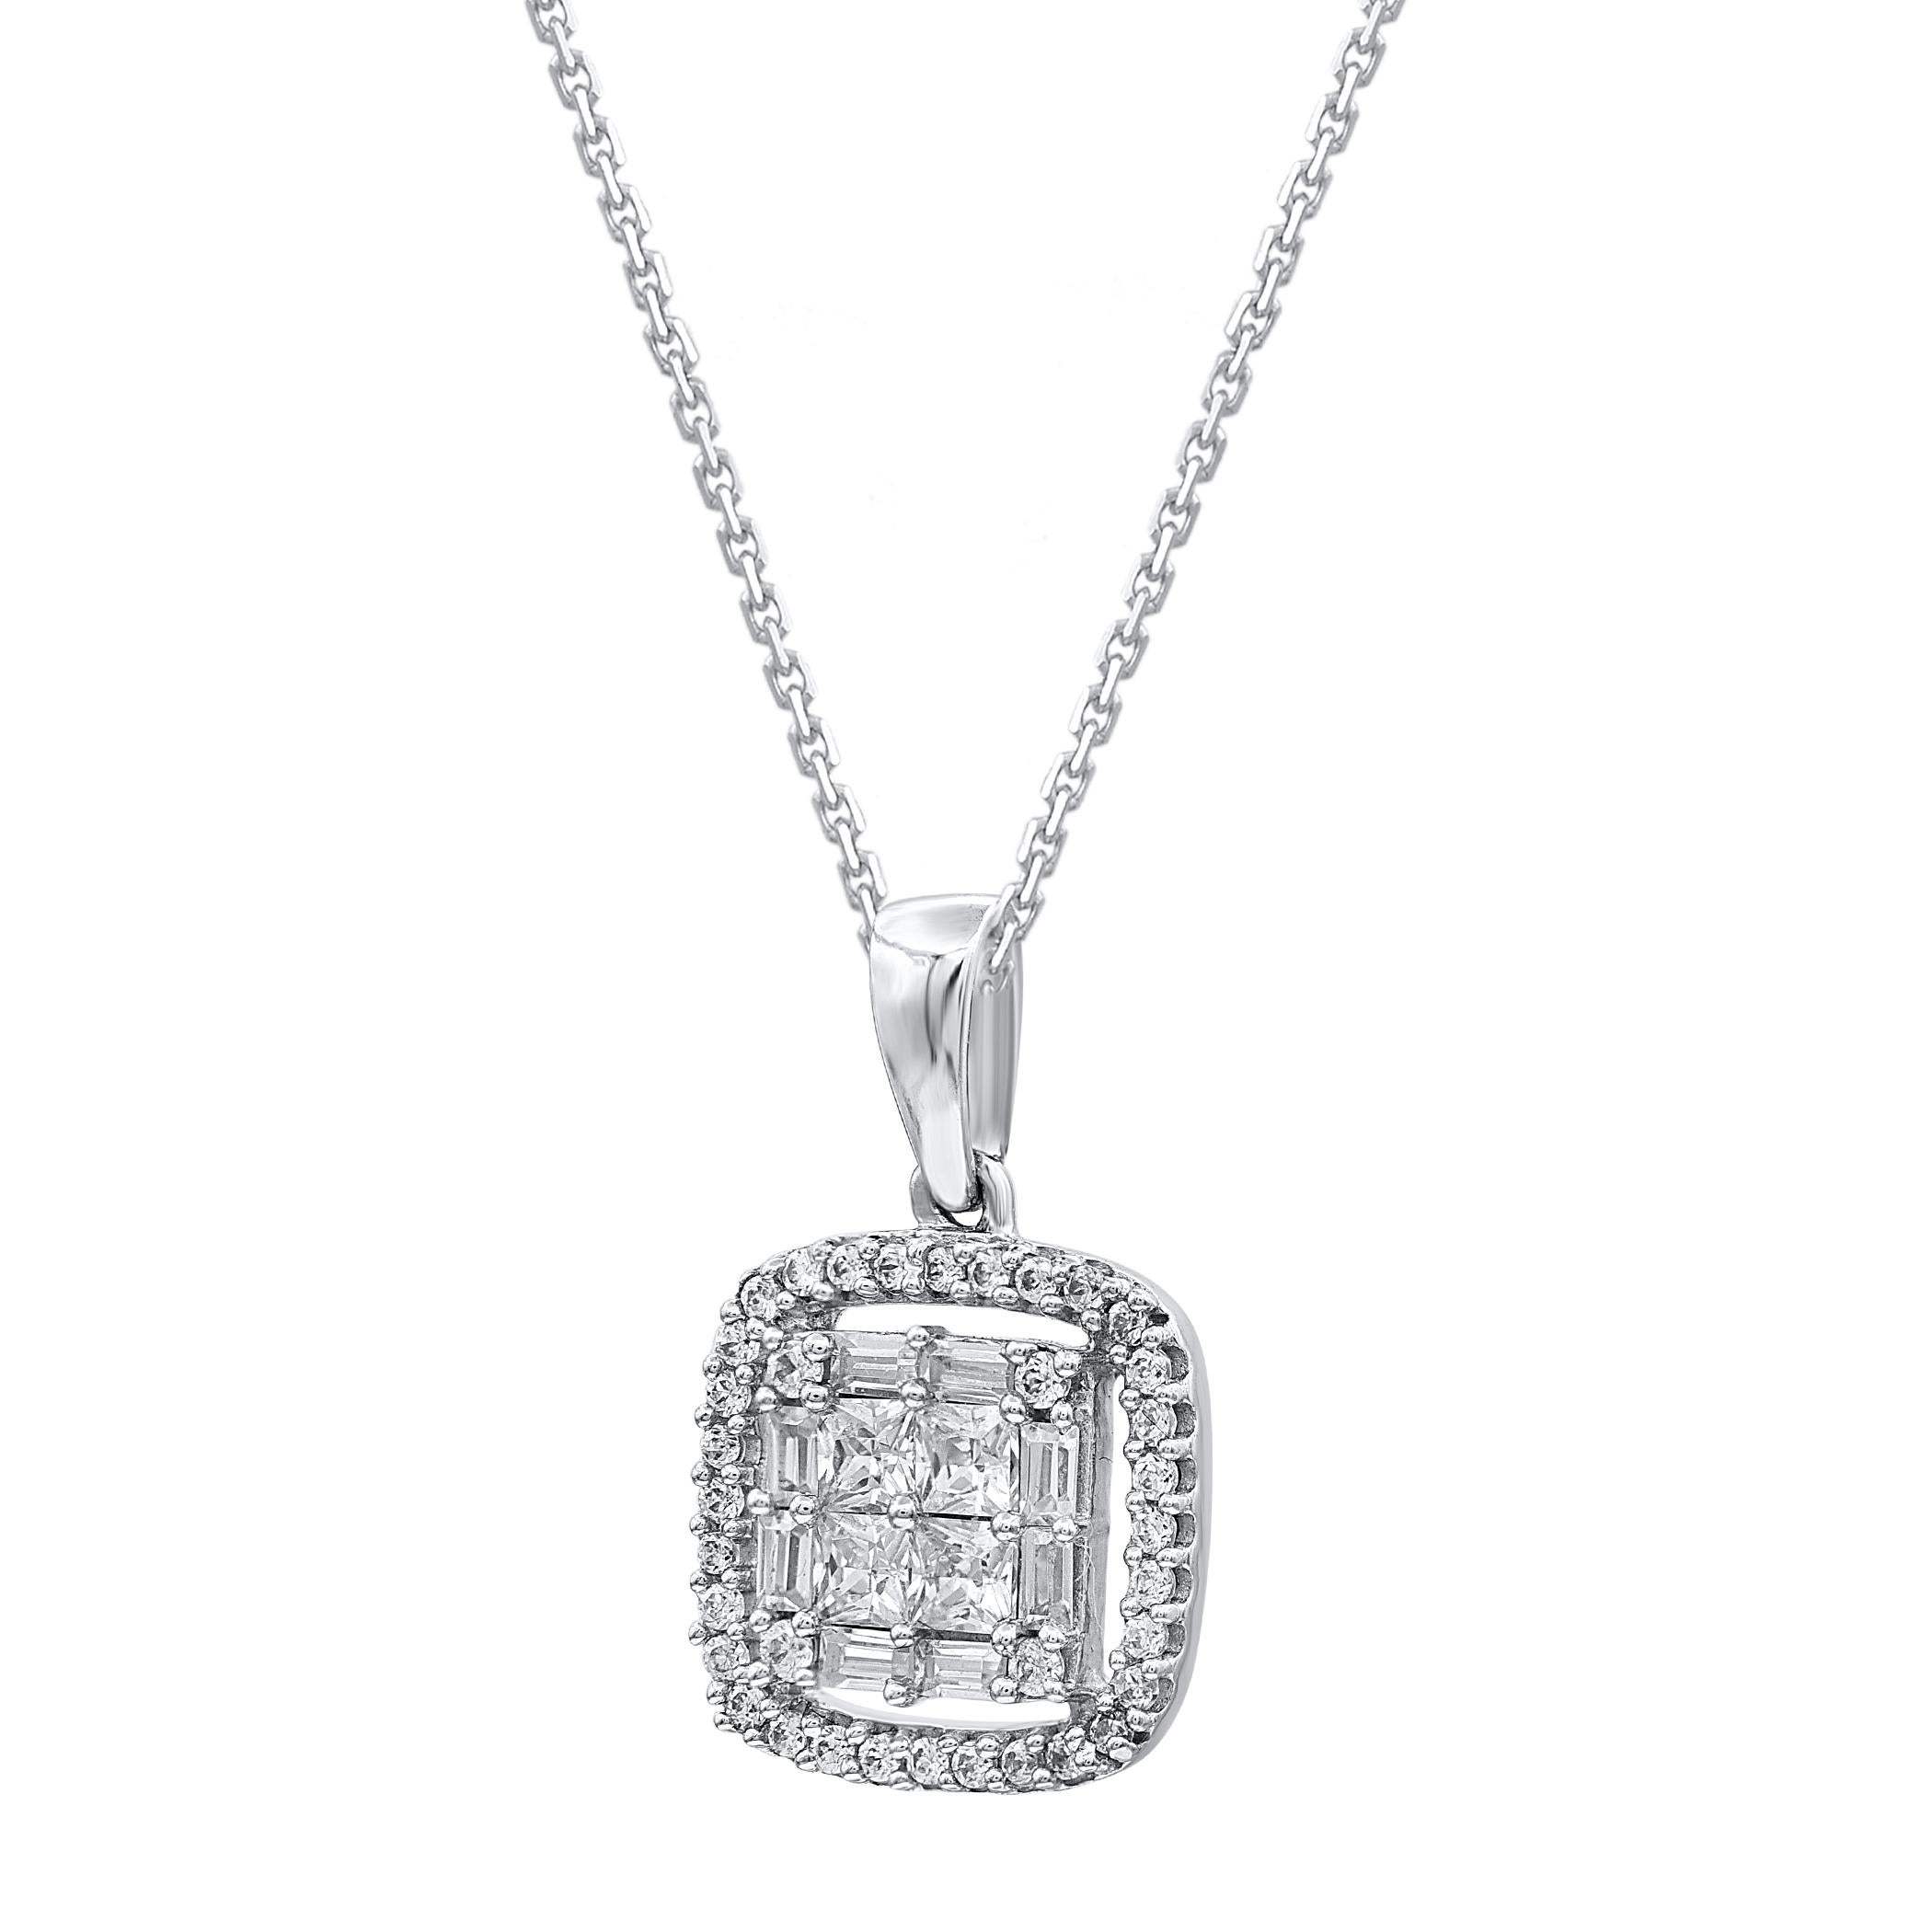 This beautiful cushion pendant necklace is studded with 51 single cut, brilliant cut and baguette cut natural diamonds in prong & channel setting. The total diamond weight of these diamond pendant is 0.33 carats. All the diamonds are H-I color, I-2